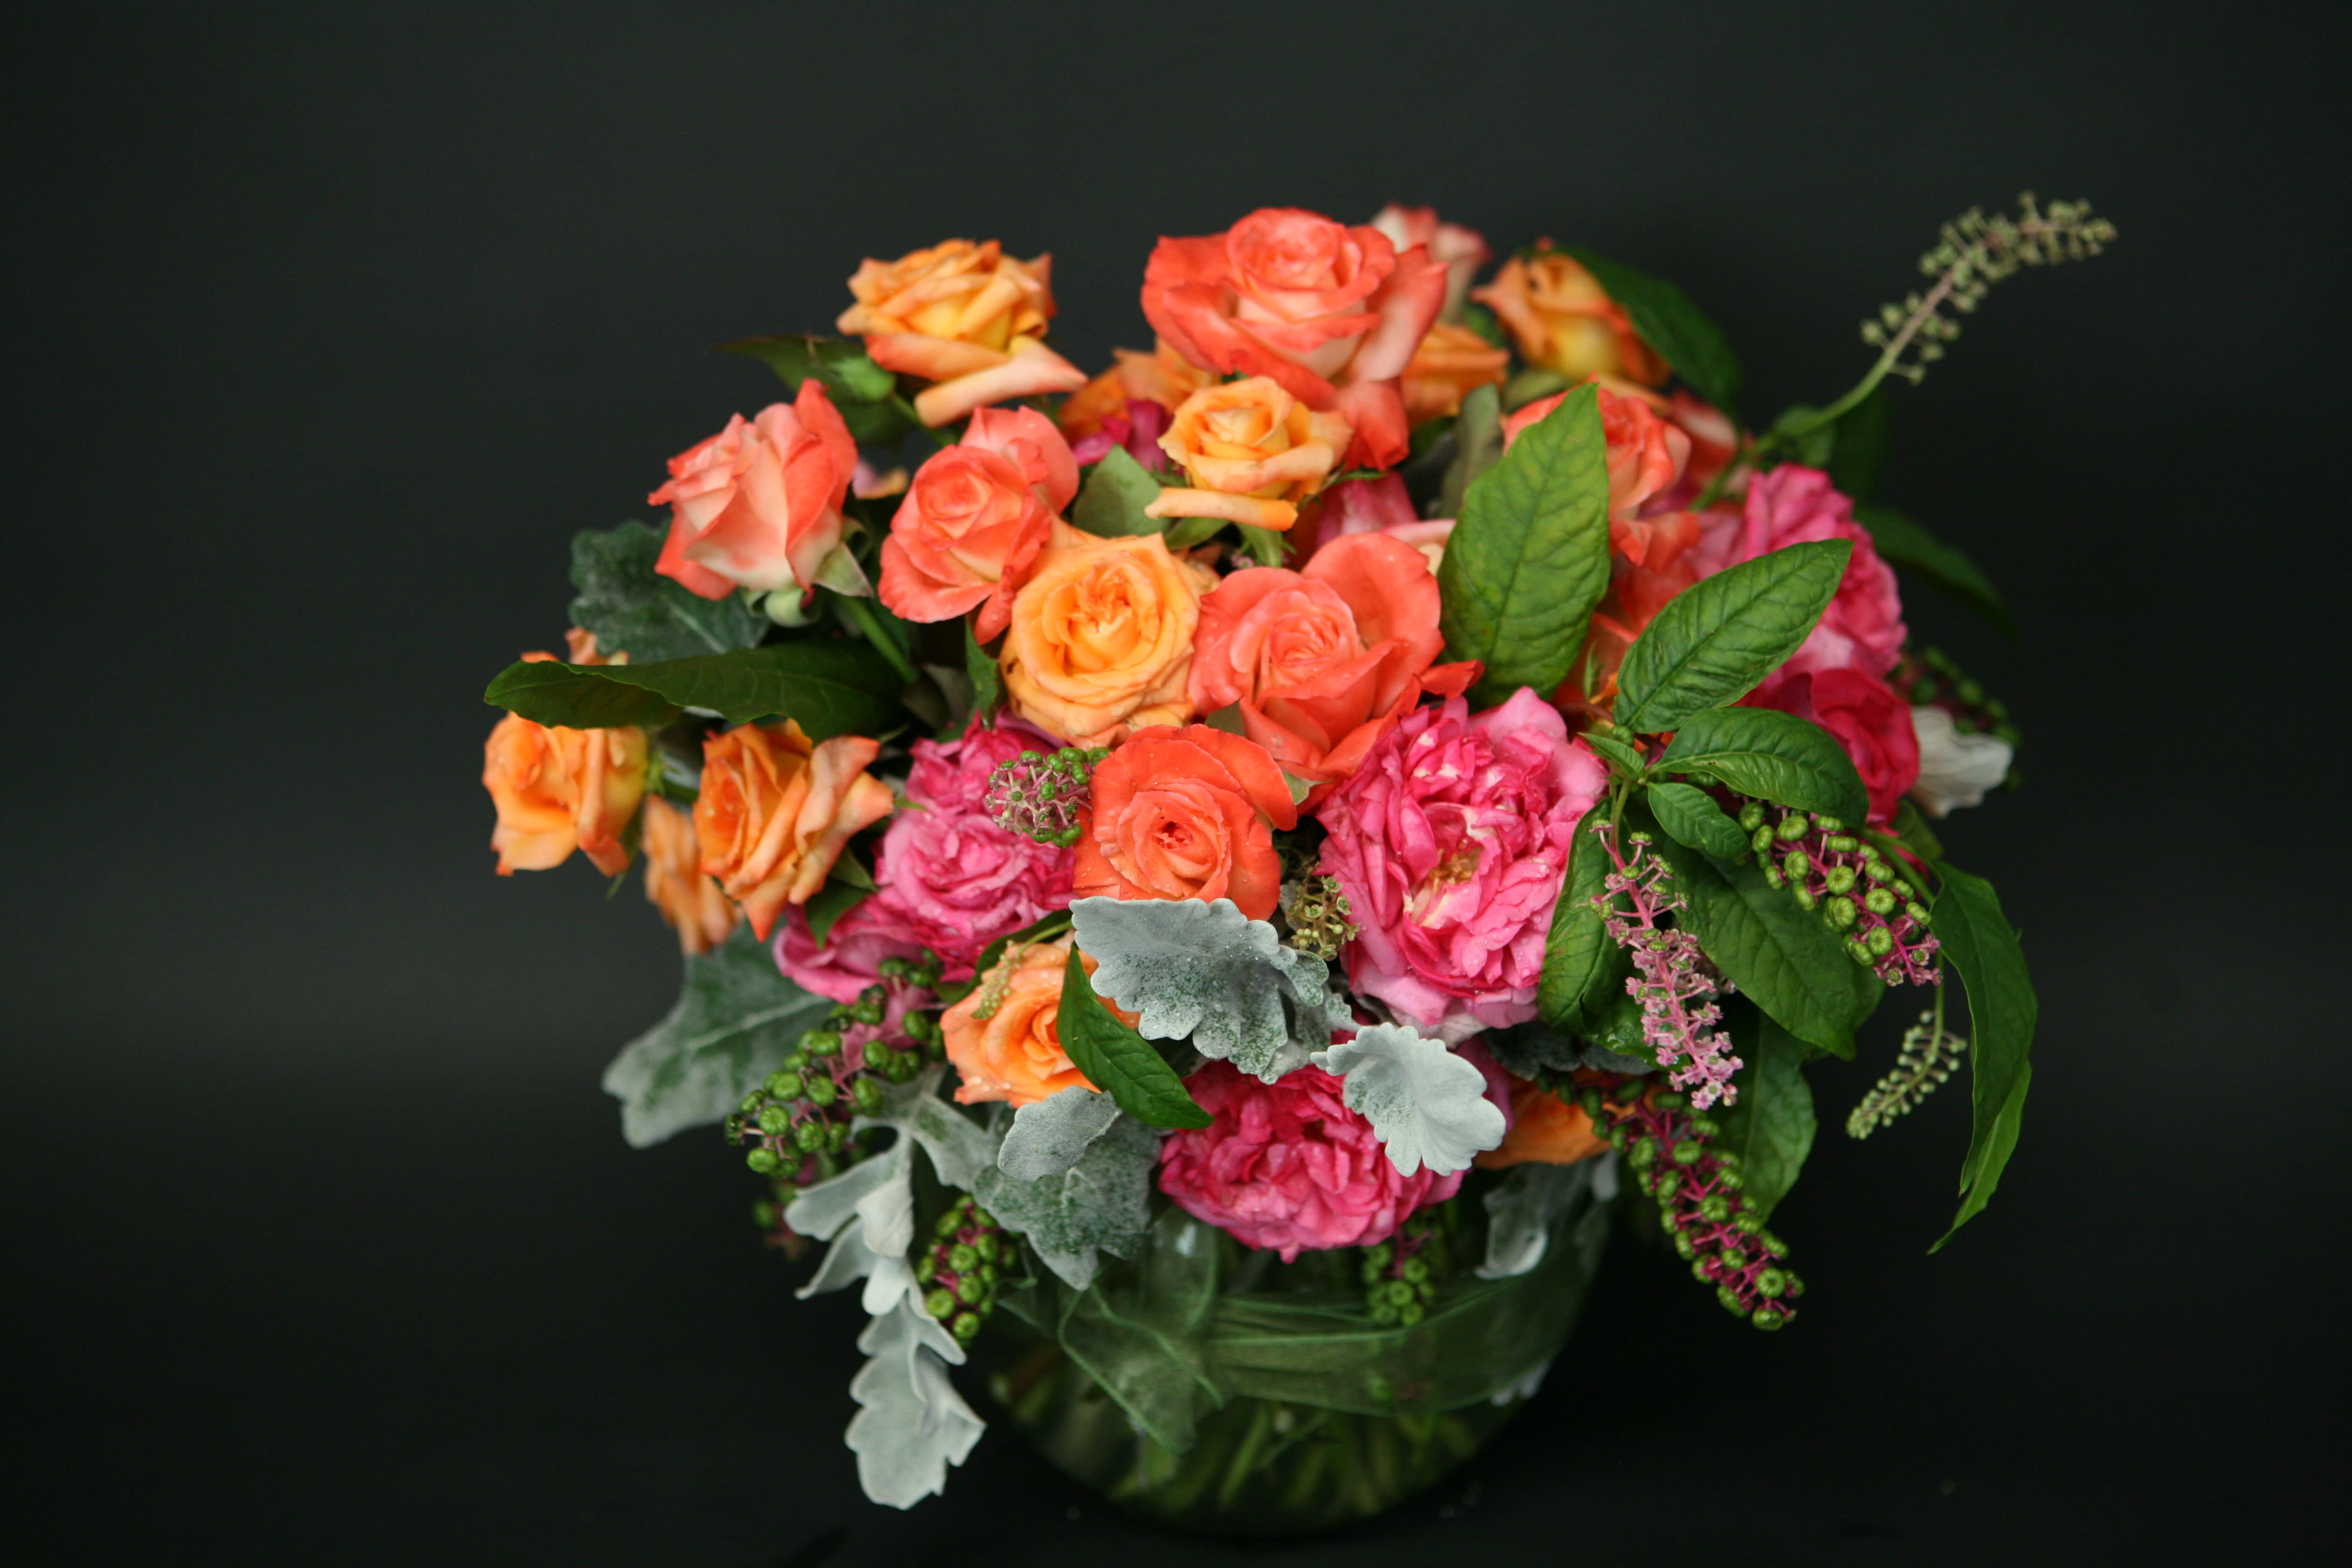 Mix Roses and Dusty Miller - Different colored roses and dusty miller make up this vibrant arrangement. 